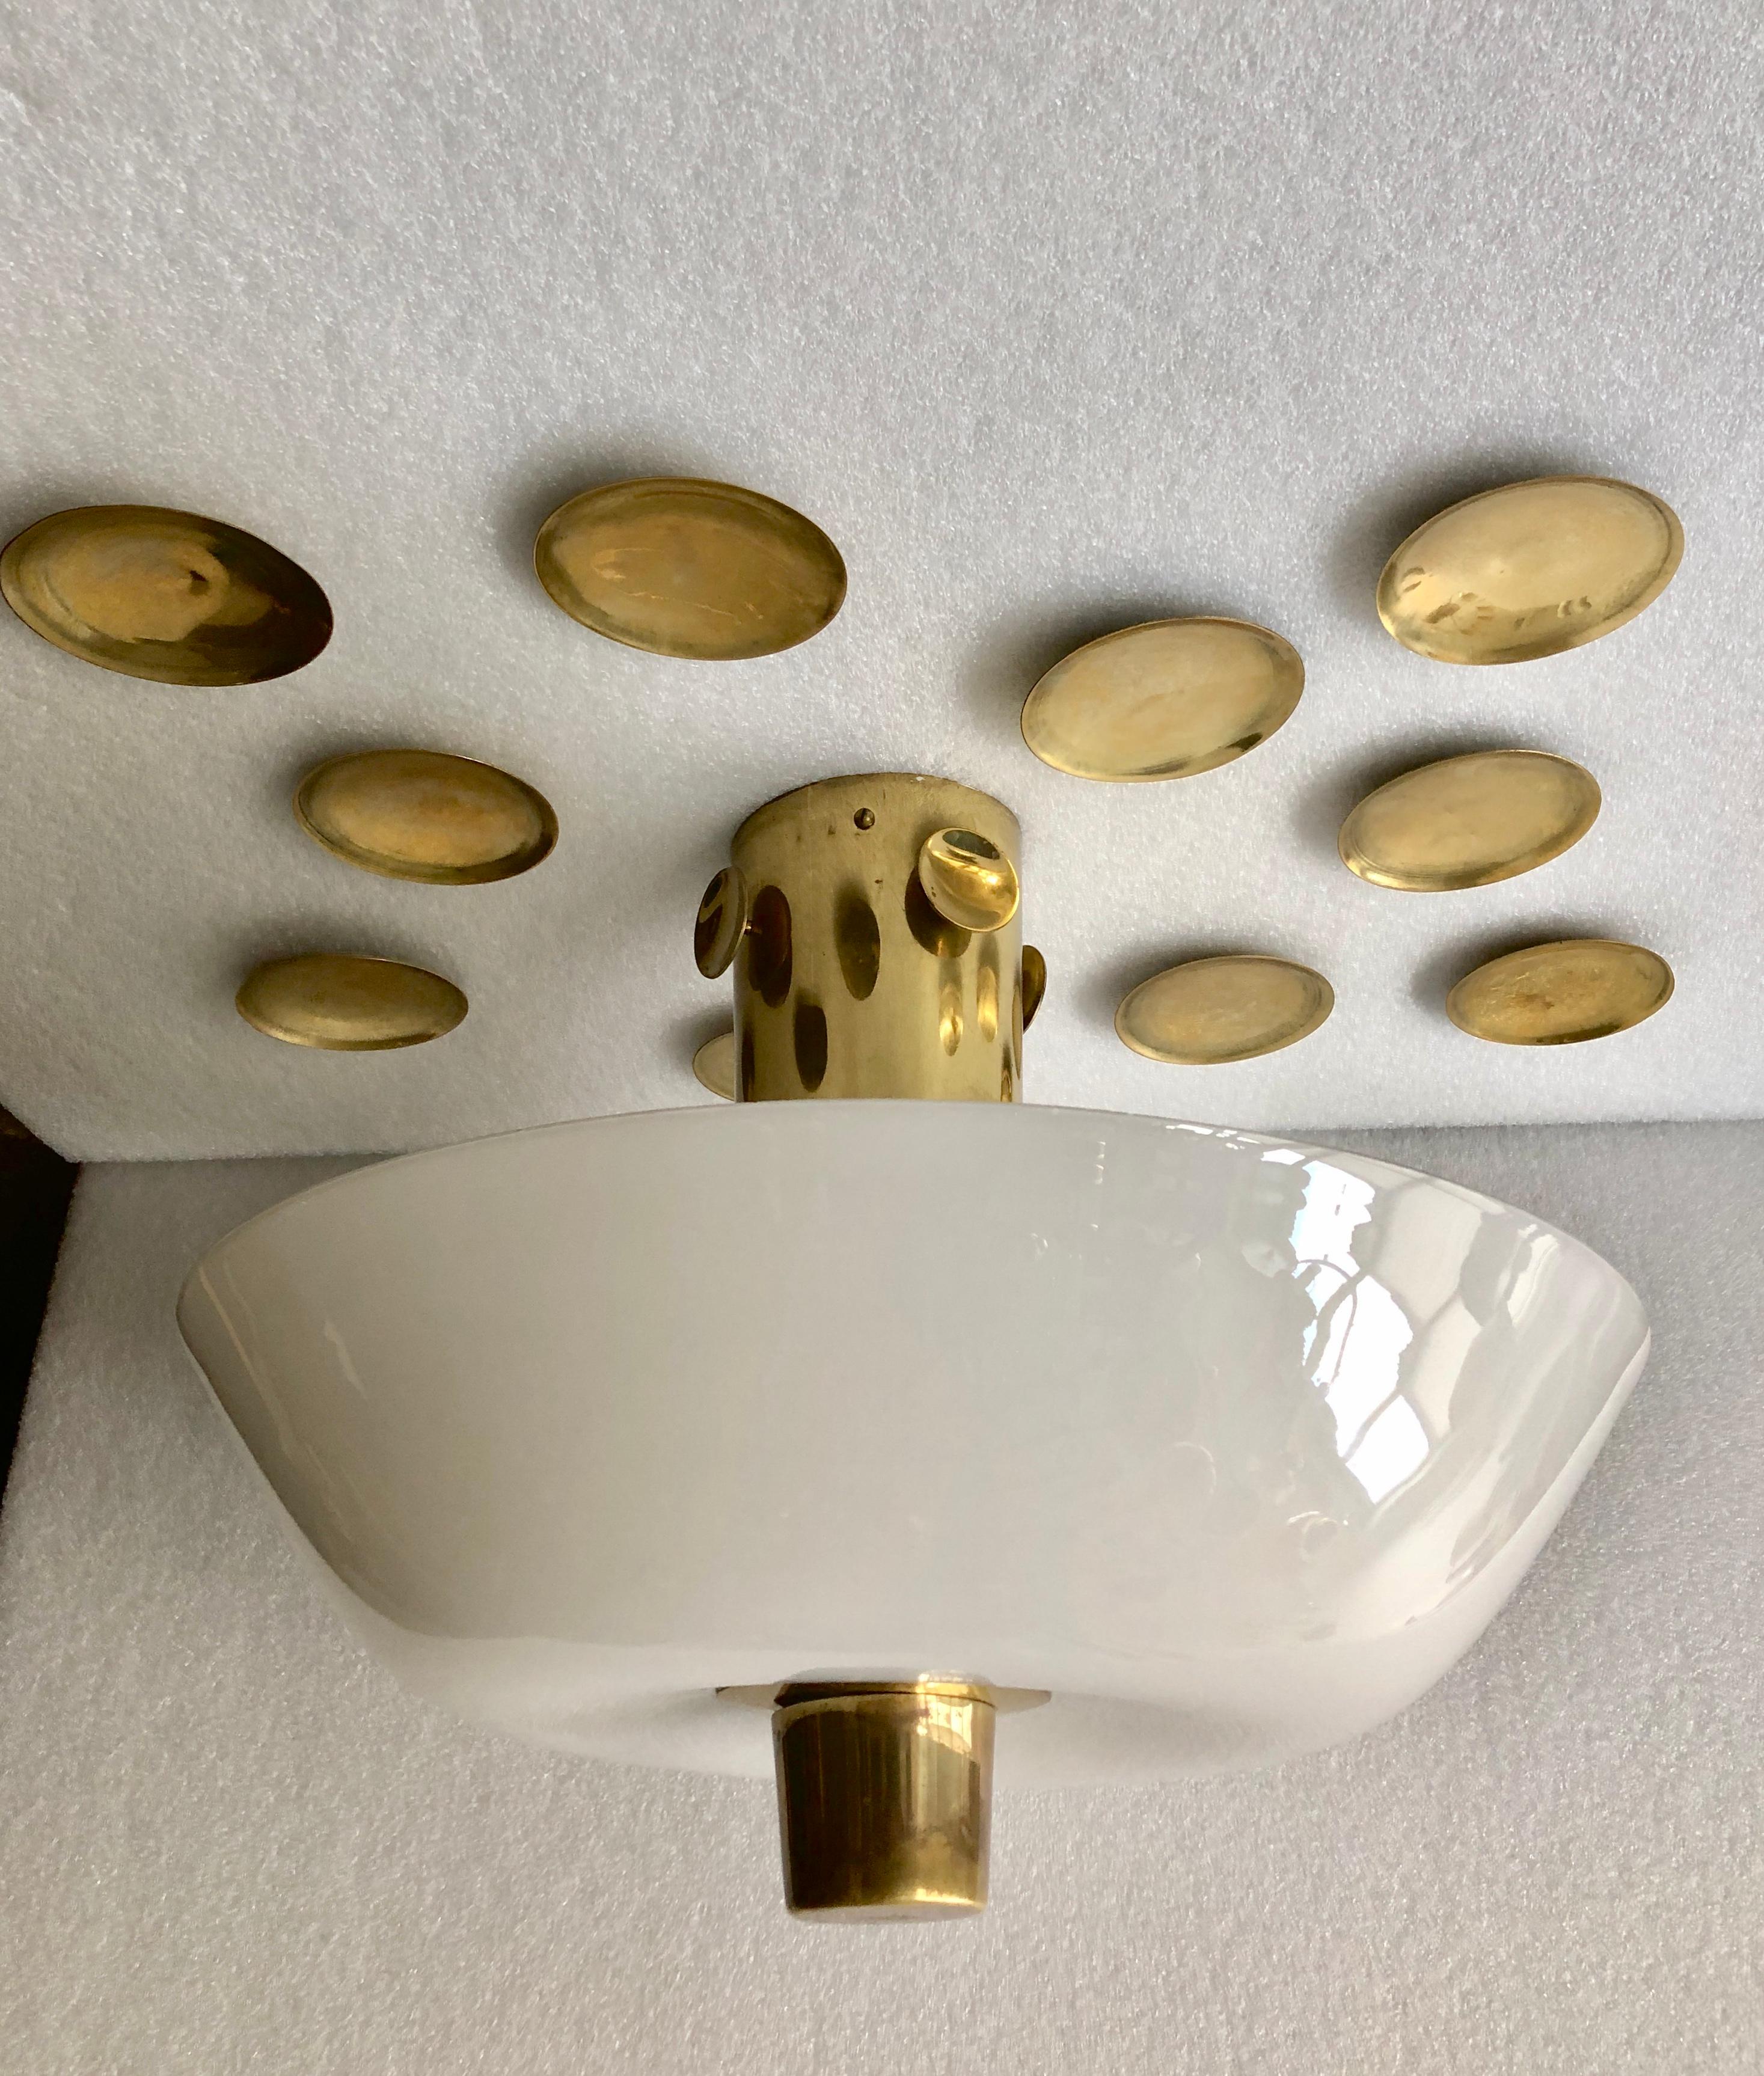 Rare available ceiling light with polished brass ceiling mount reflectors. Model #8052, designed by Paavo Tynell for Taiot/ Idman, Finland , Circa 1950th. Polished brass with opaline glass reflector. 
Similar example at catalogue Idman Lighting